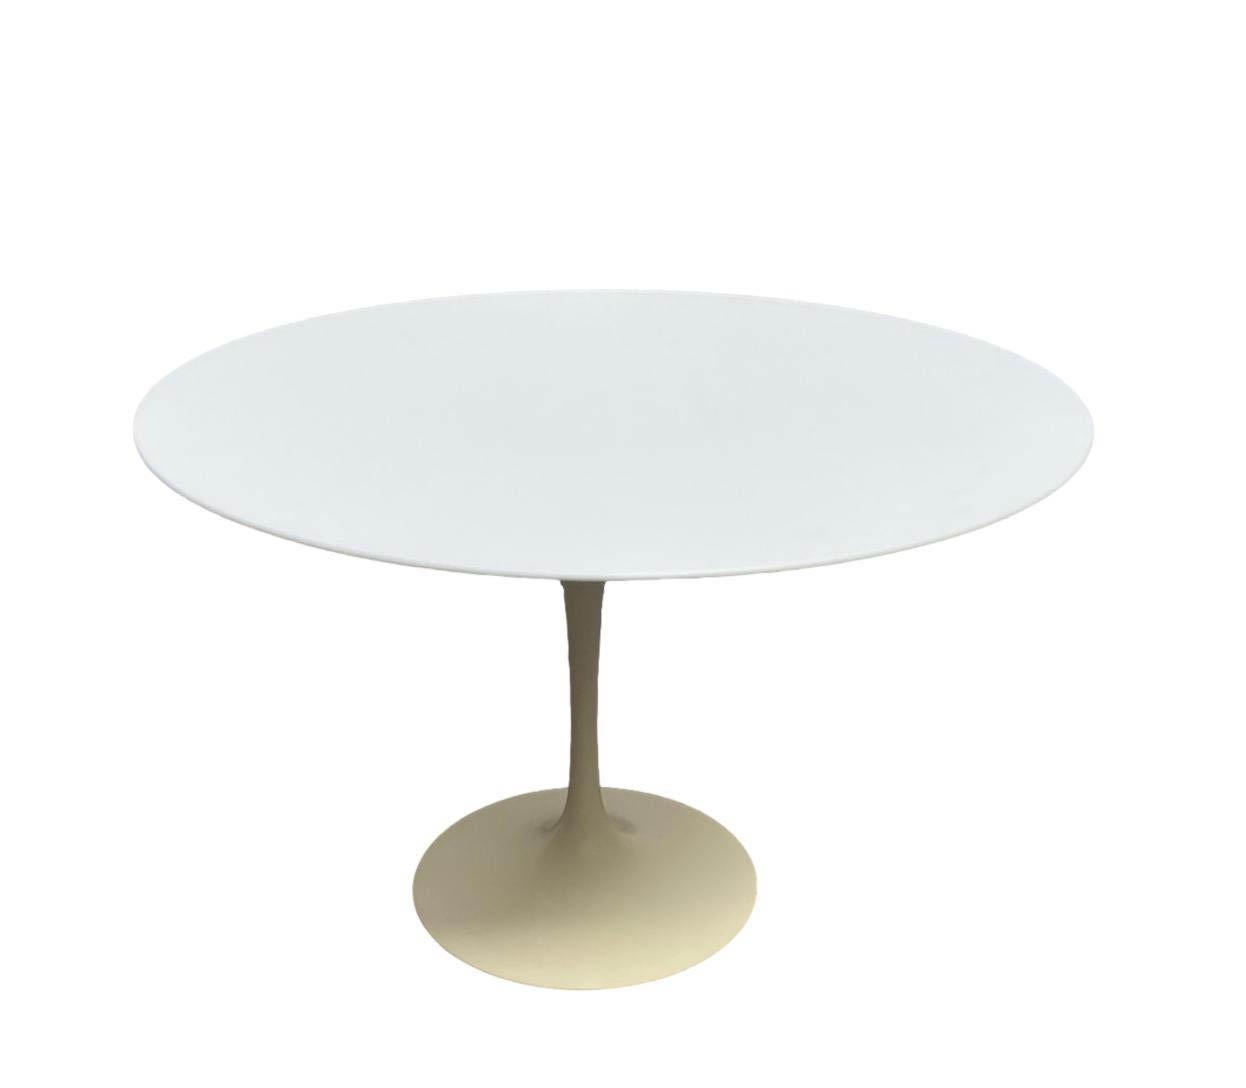 Original Tulipano table from the Eero Saarinen collection by Knoll Studio. Tulip round table, white with white base, plastic laminate and aluminium.